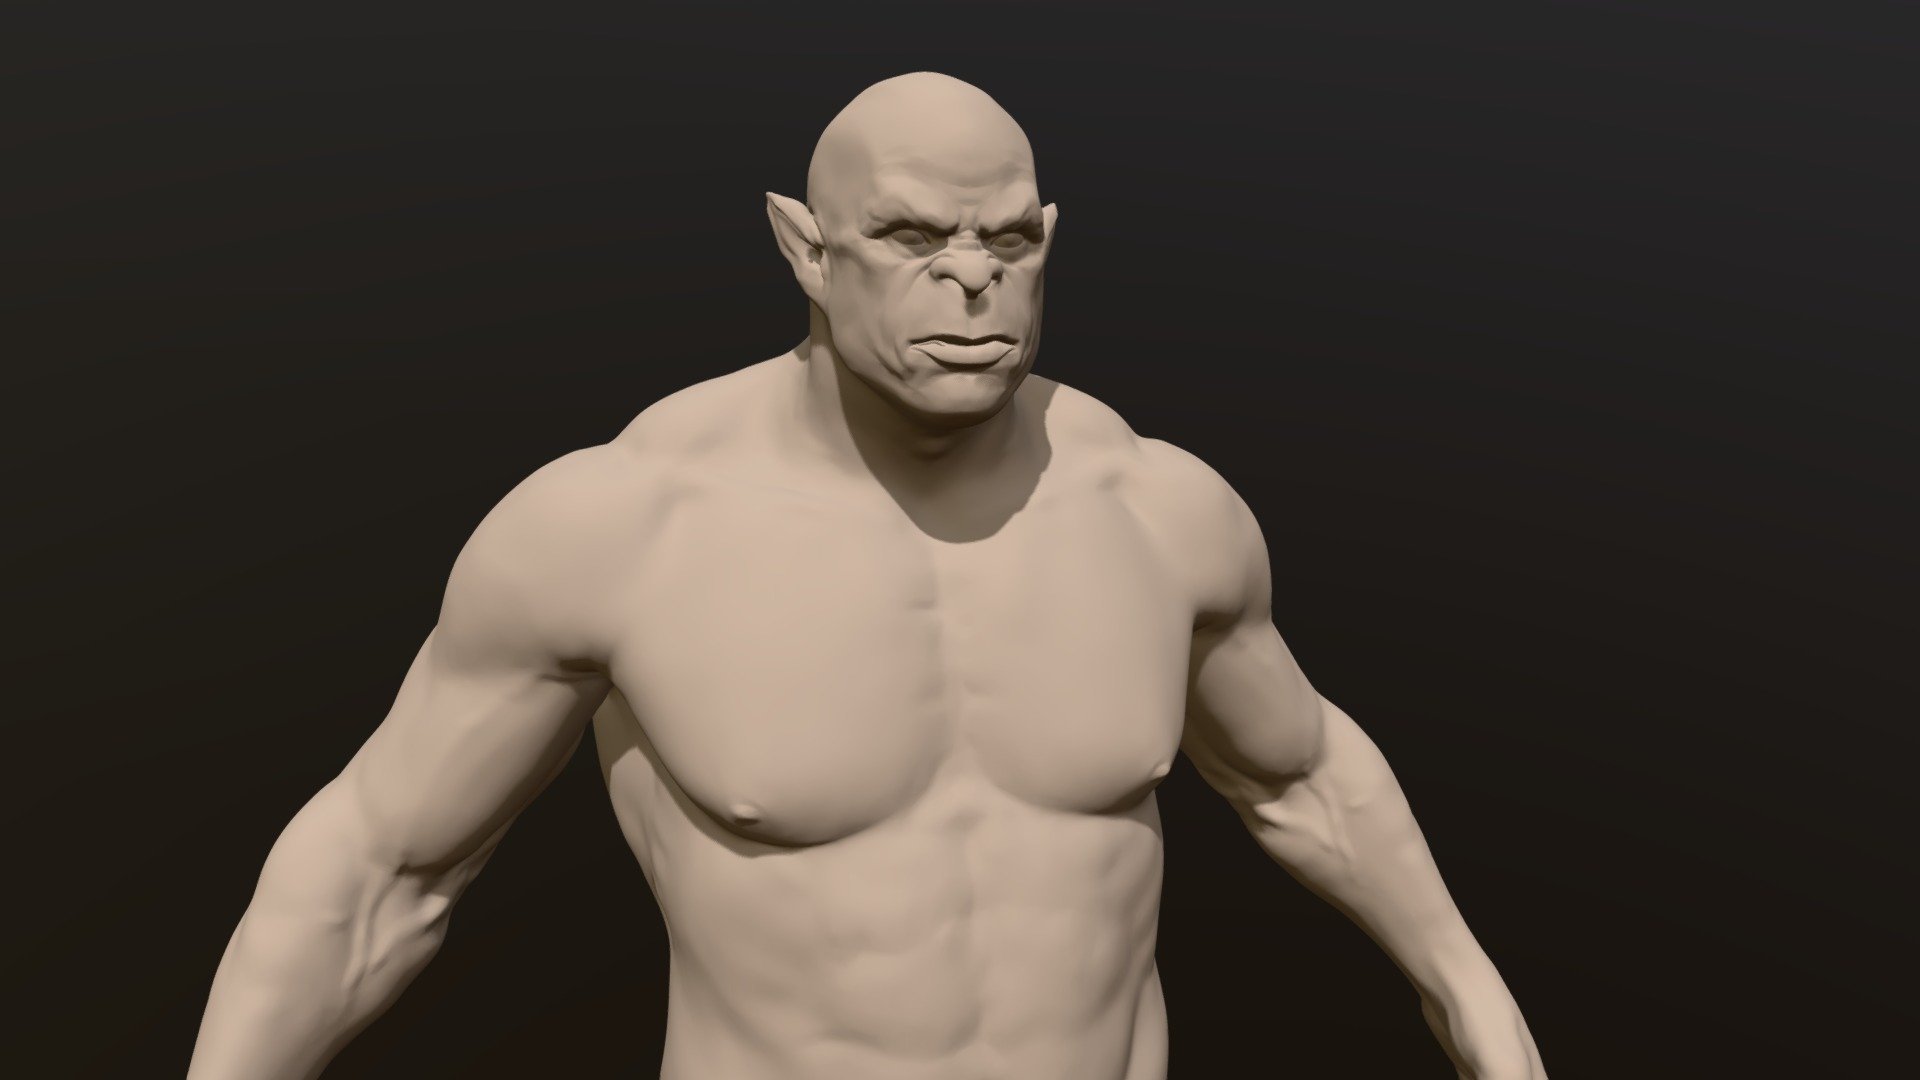 More images: https://www.artstation.com/artwork/JlnxLZ

This started as anatomy sketch to practice bulkier build and soon after creating this strong sturdy torso I said to myself, hey this would fit as an orc body so i added this &ldquo;tough guy